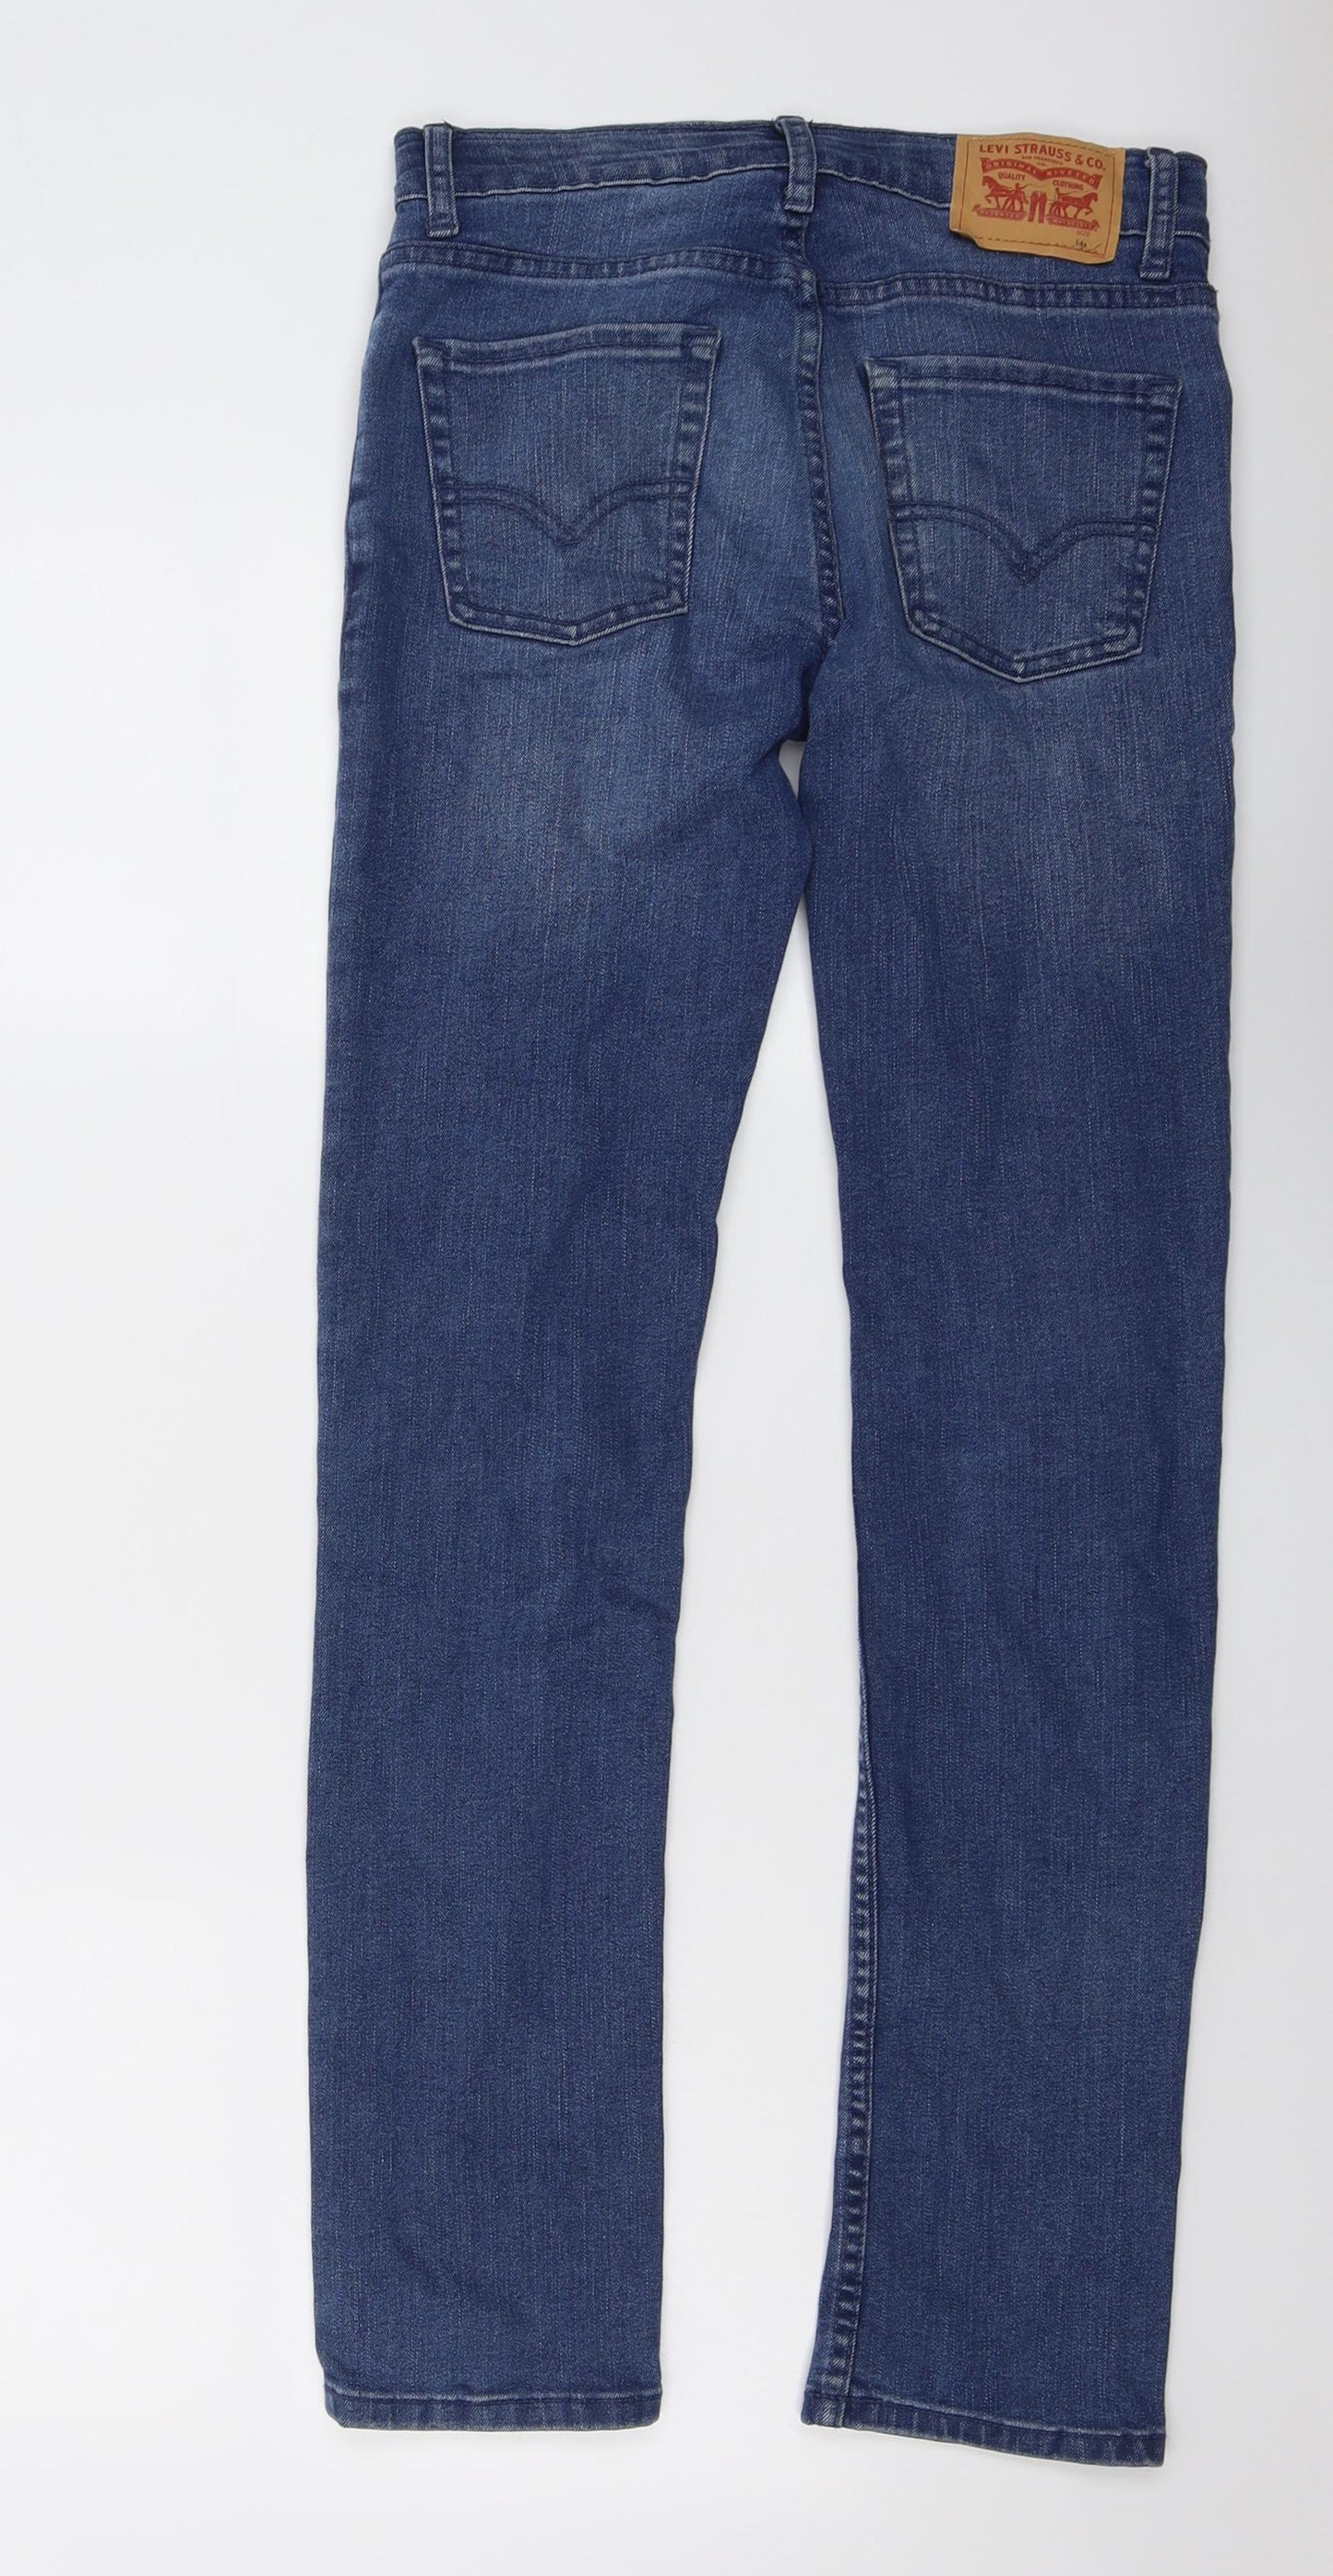 Levi's Boys Blue Cotton Skinny Jeans Size 14 Years Regular Button